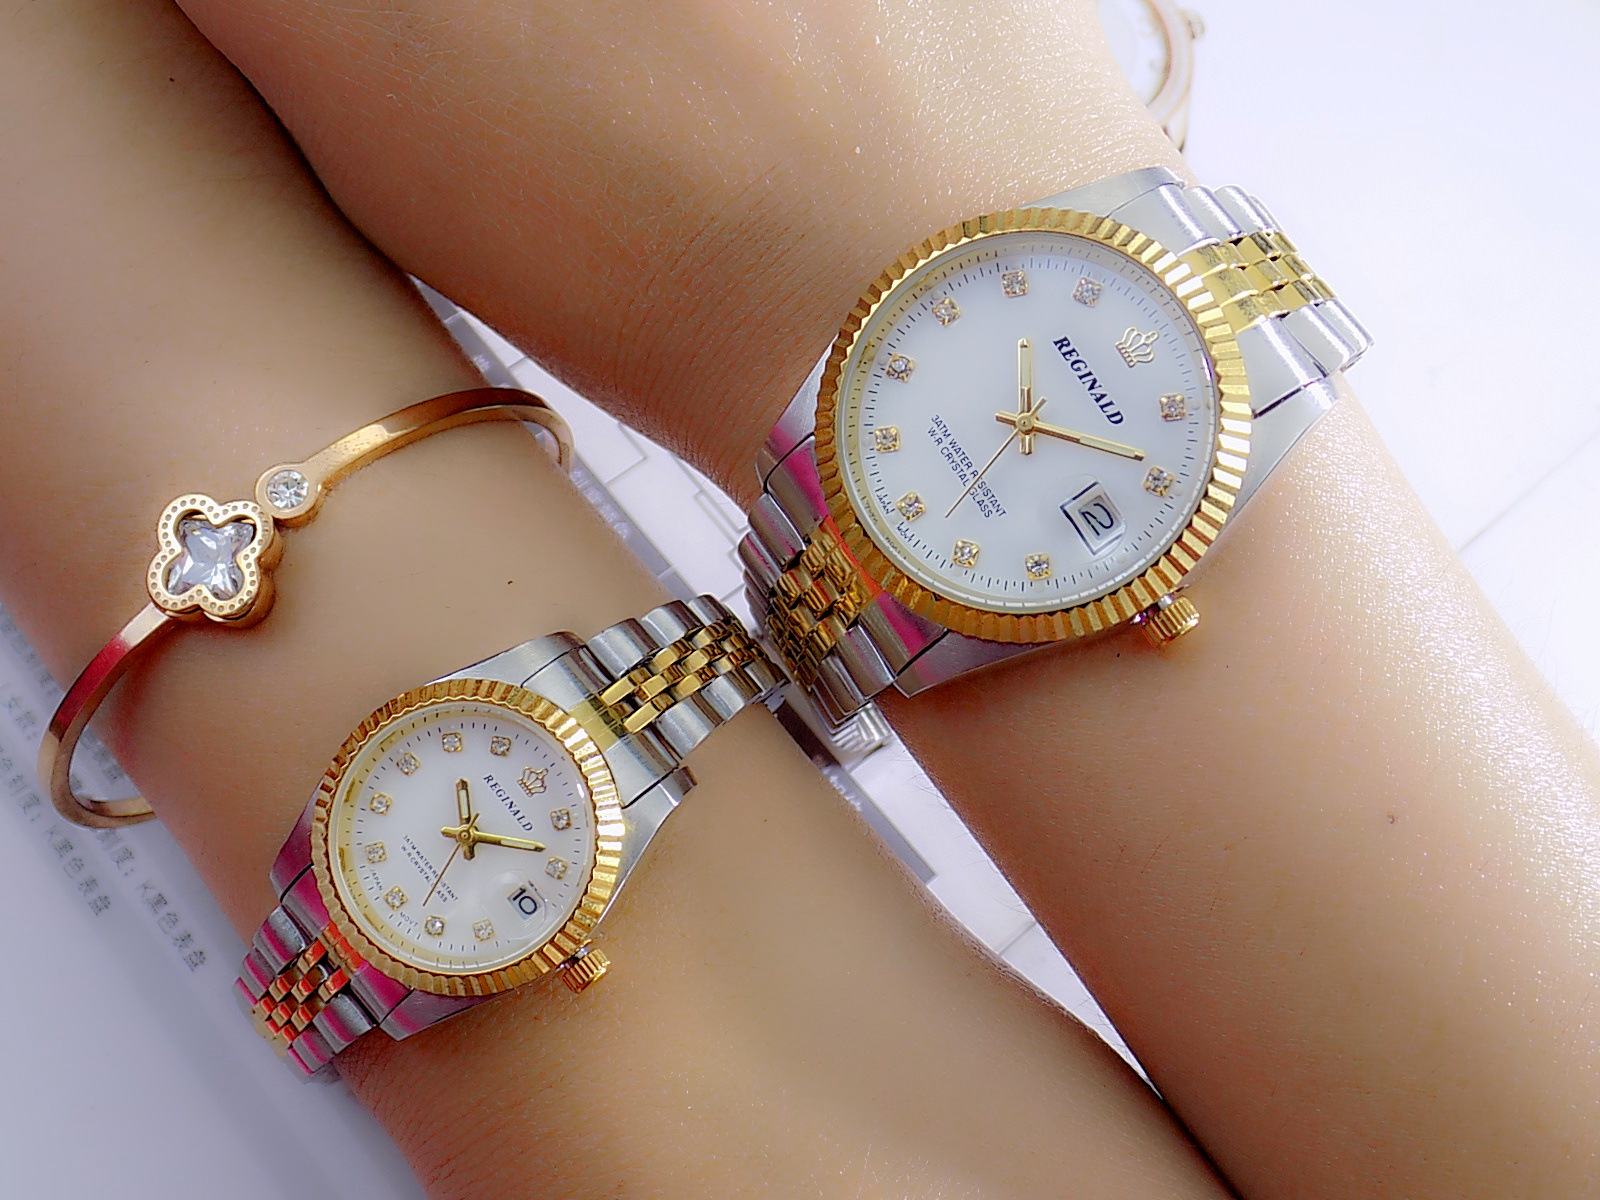 More about women’s watches